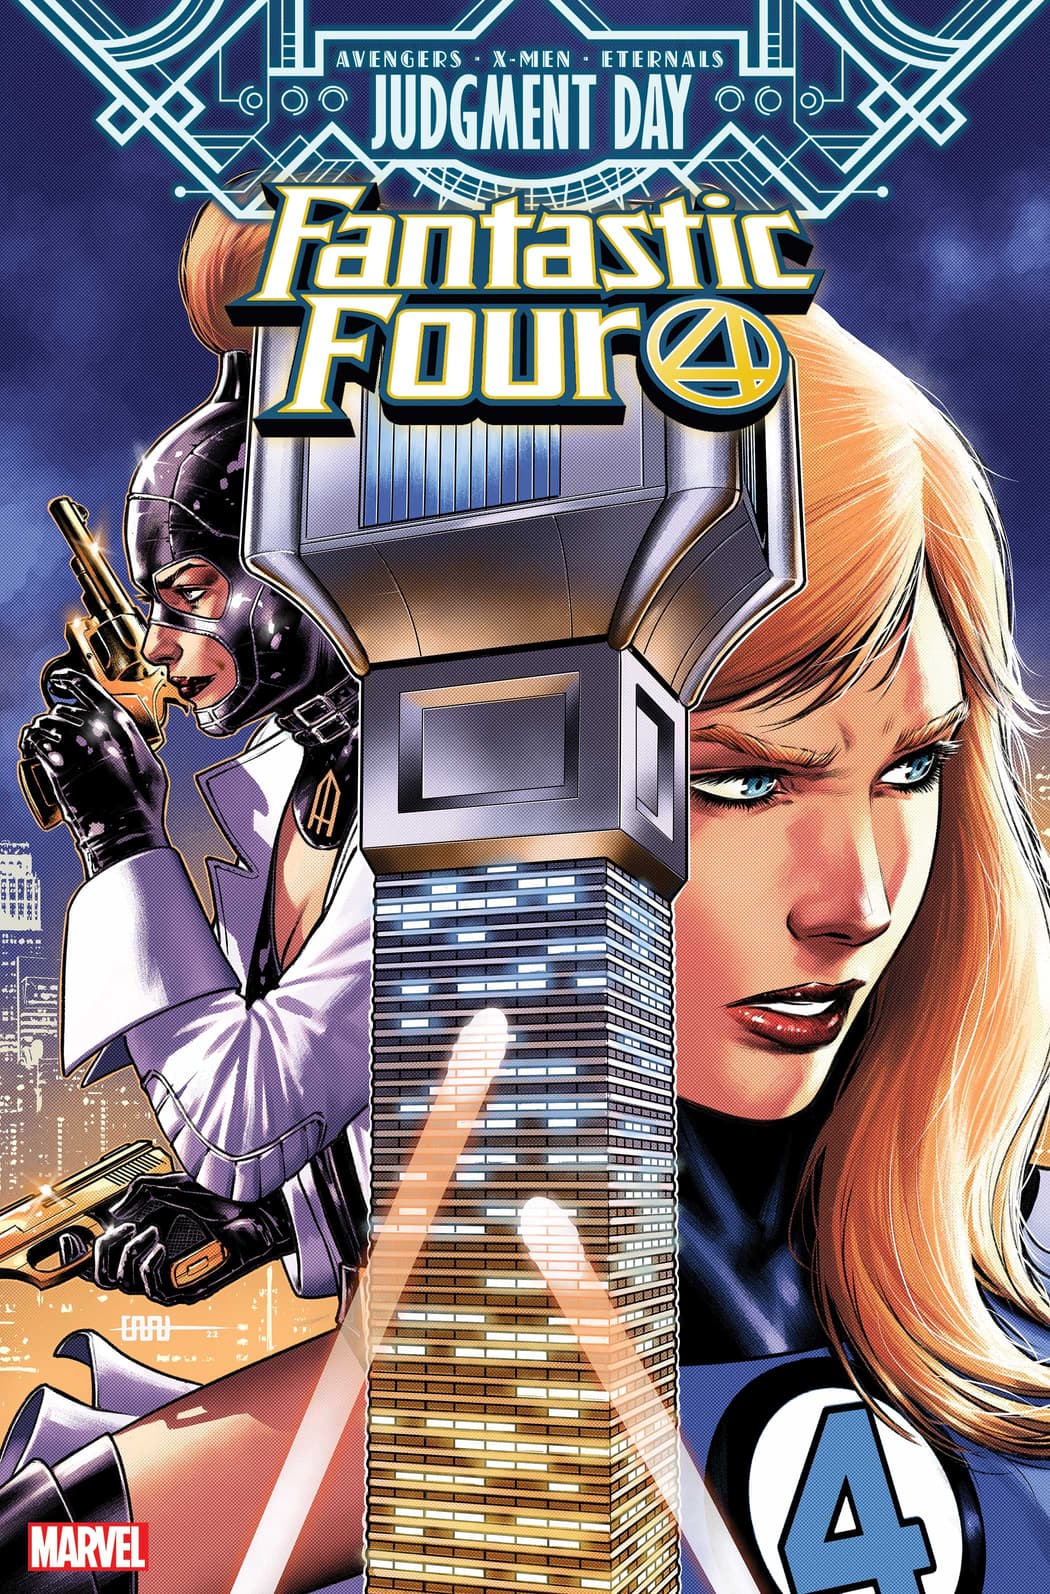 FANTASTIC FOUR #48 cover by Cafu